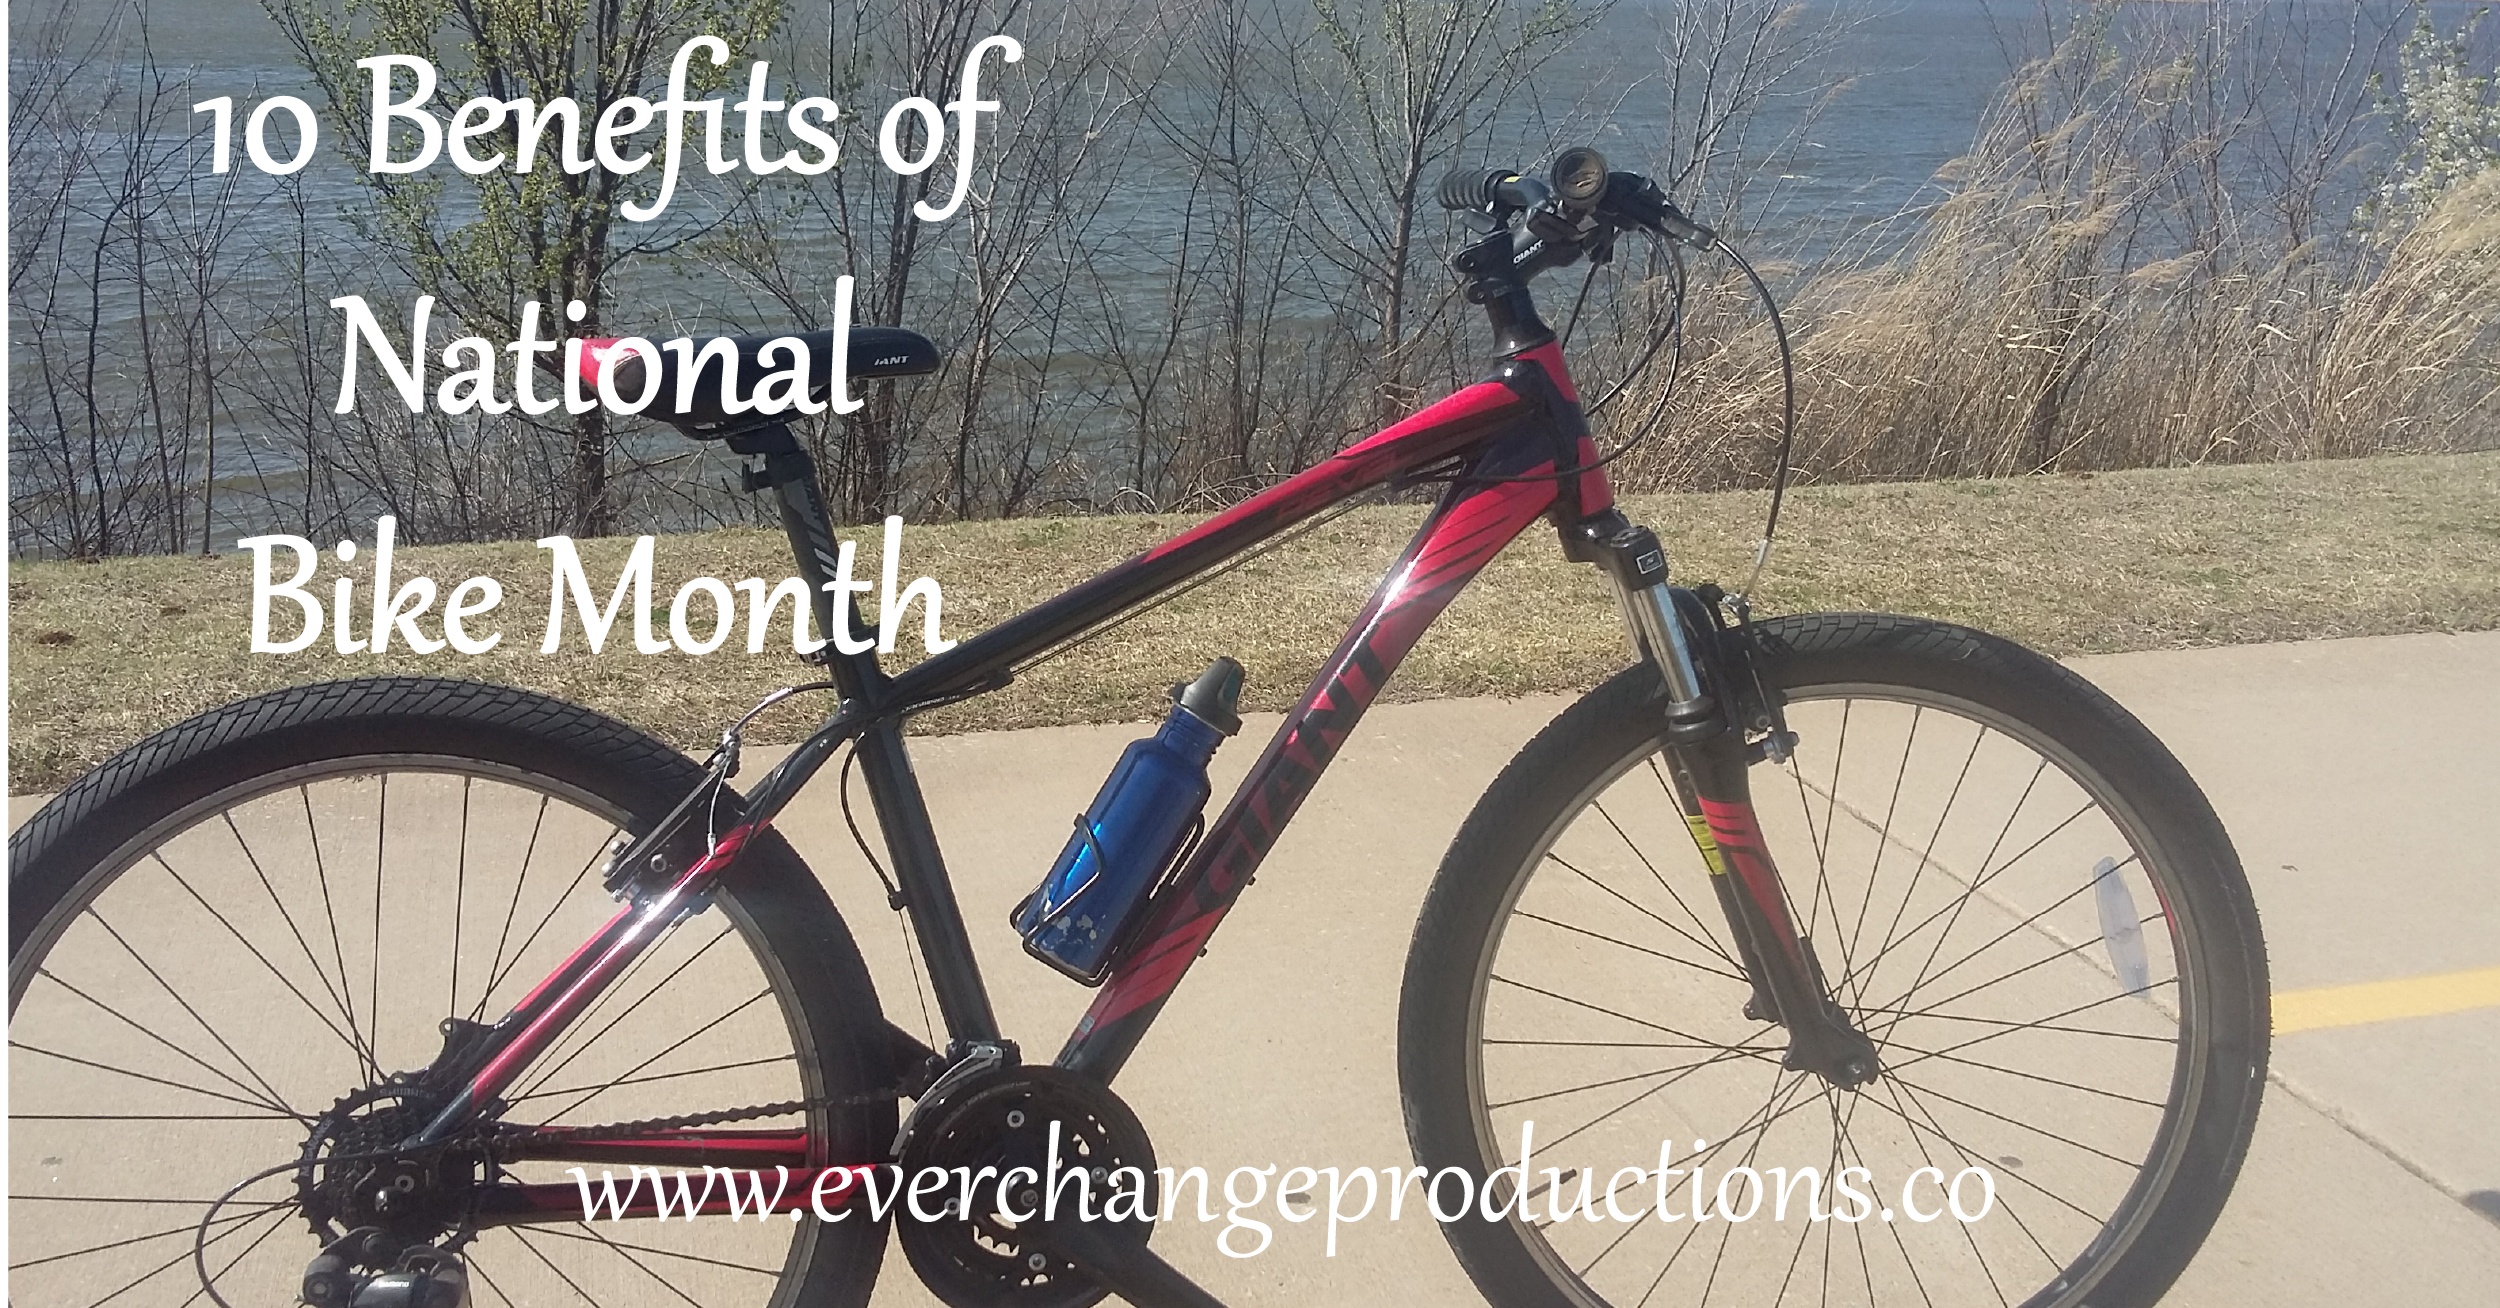 National Bike Month in May is just around the corner. Check out these benefits of this month and how to celebrate it!